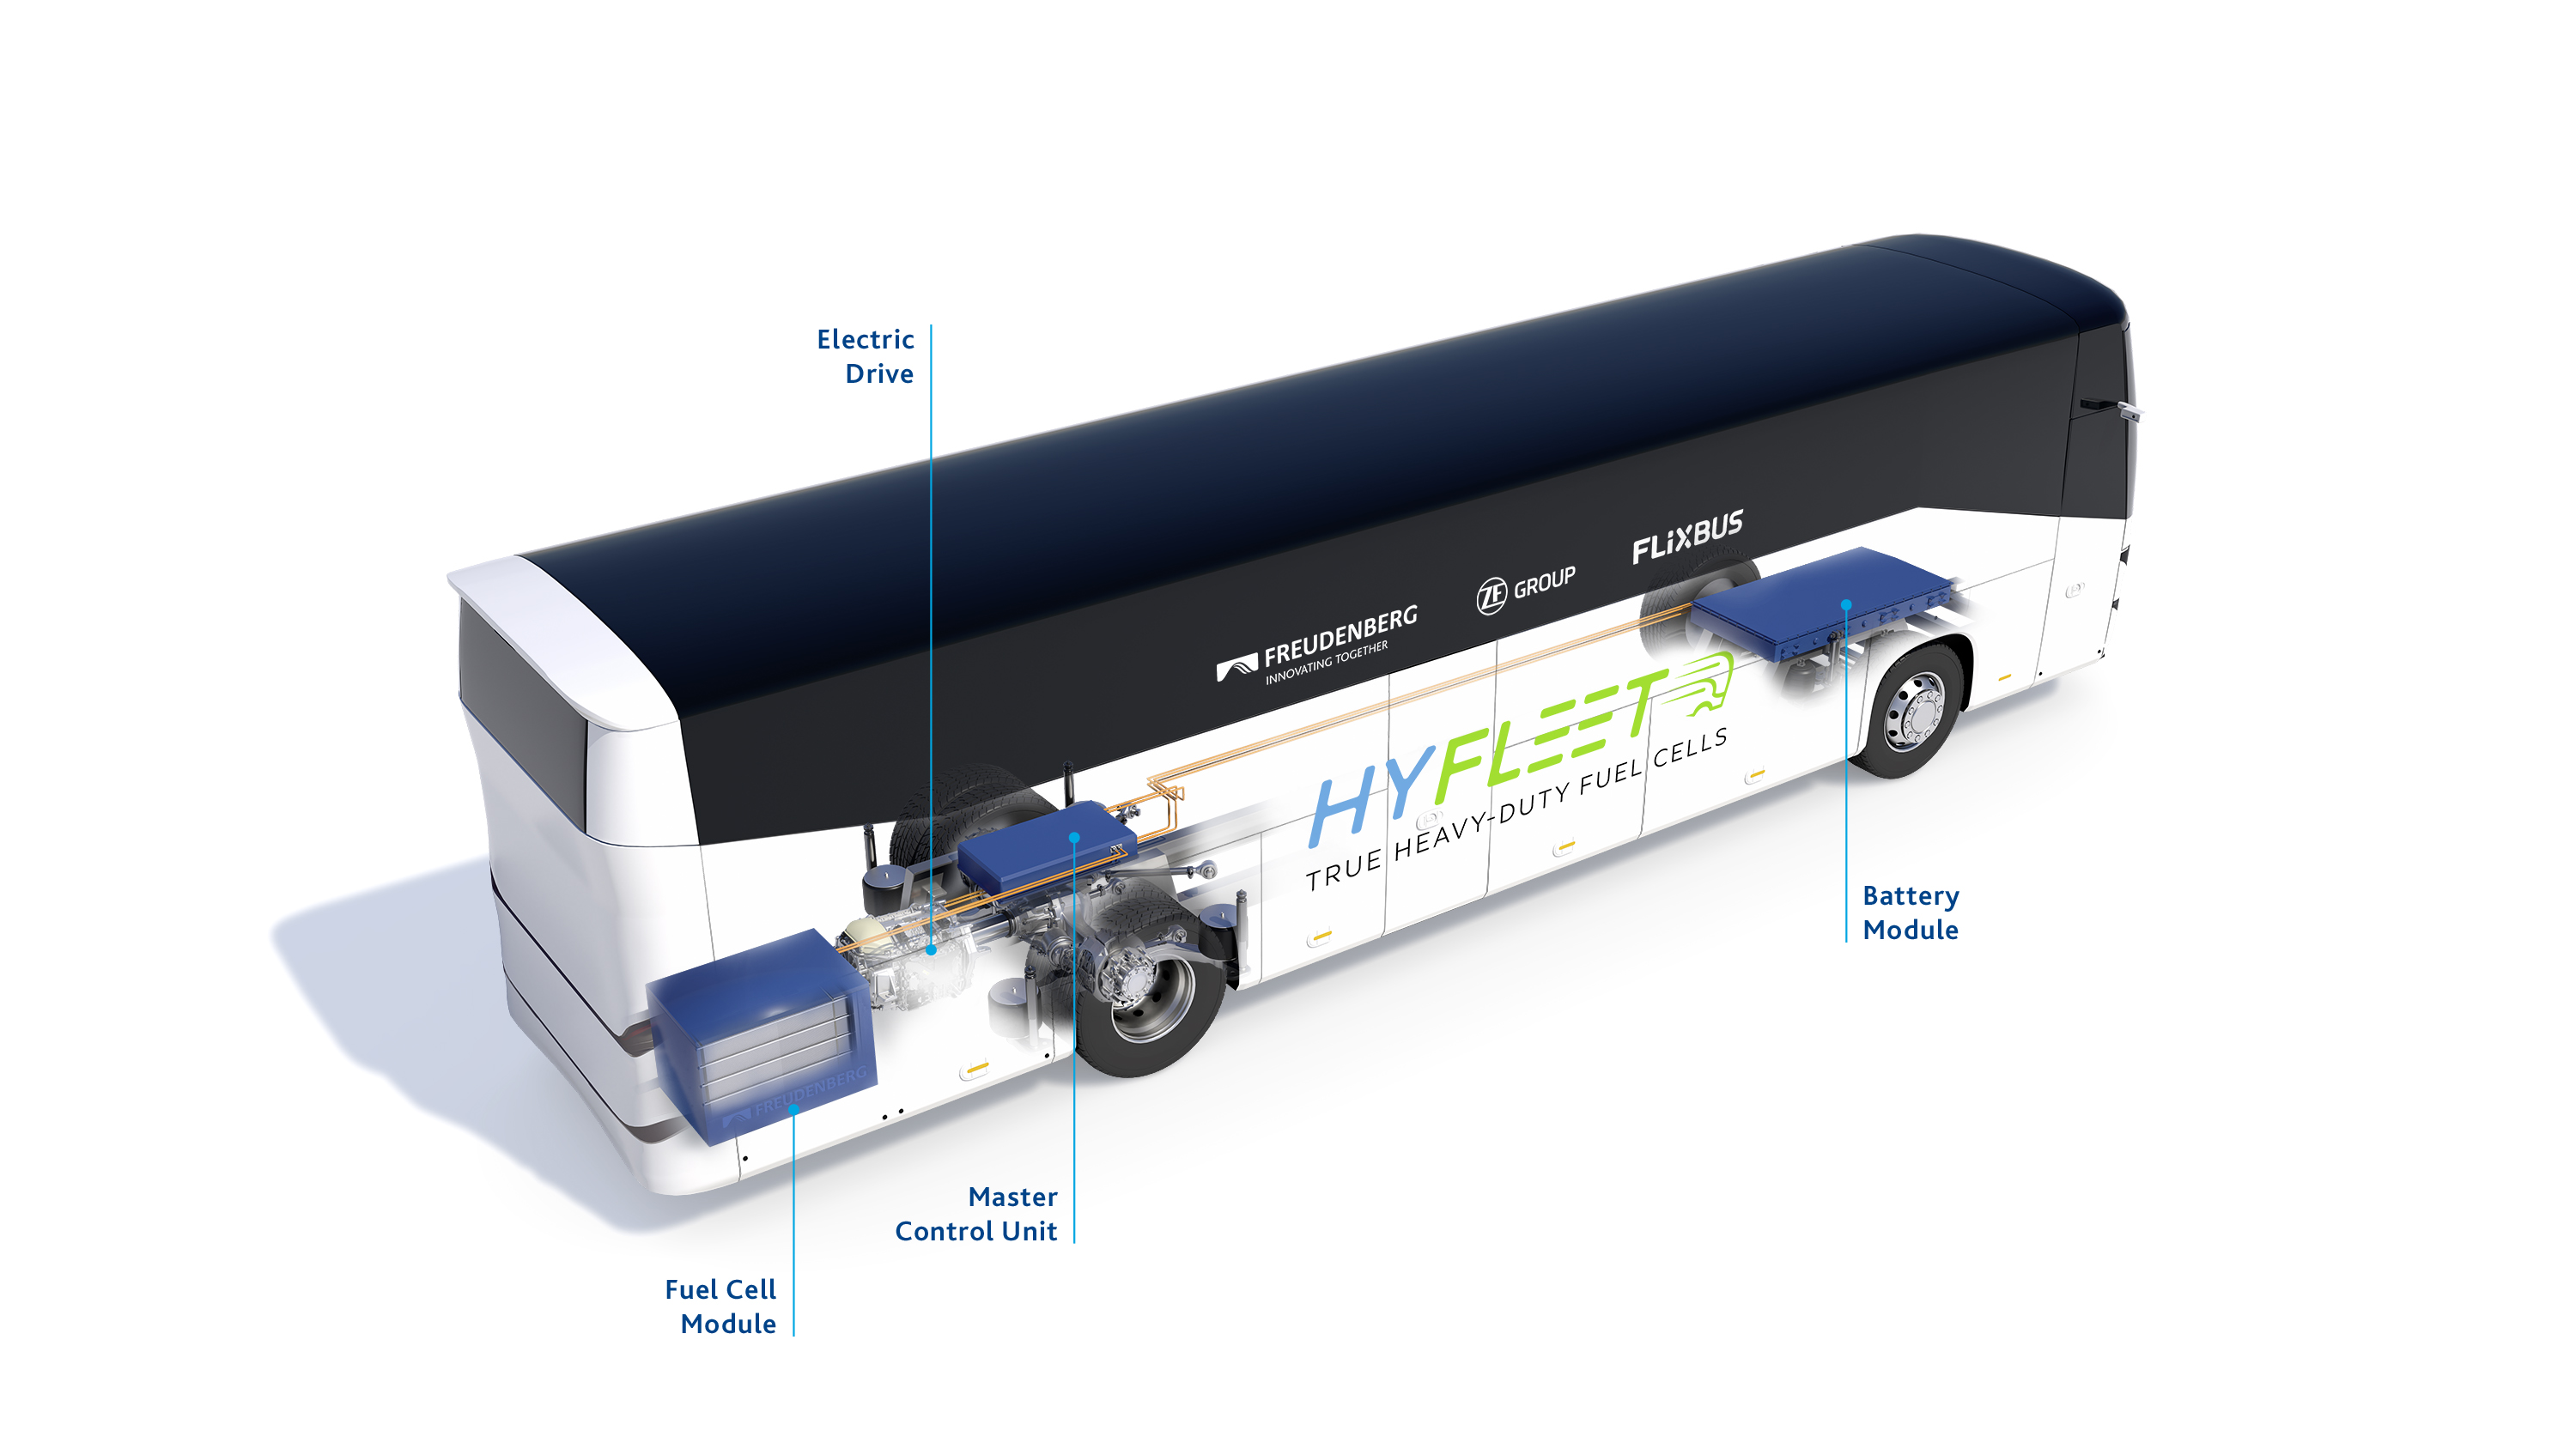 HyFleet coach project launched by Freudenberg, FlixBus and ZF